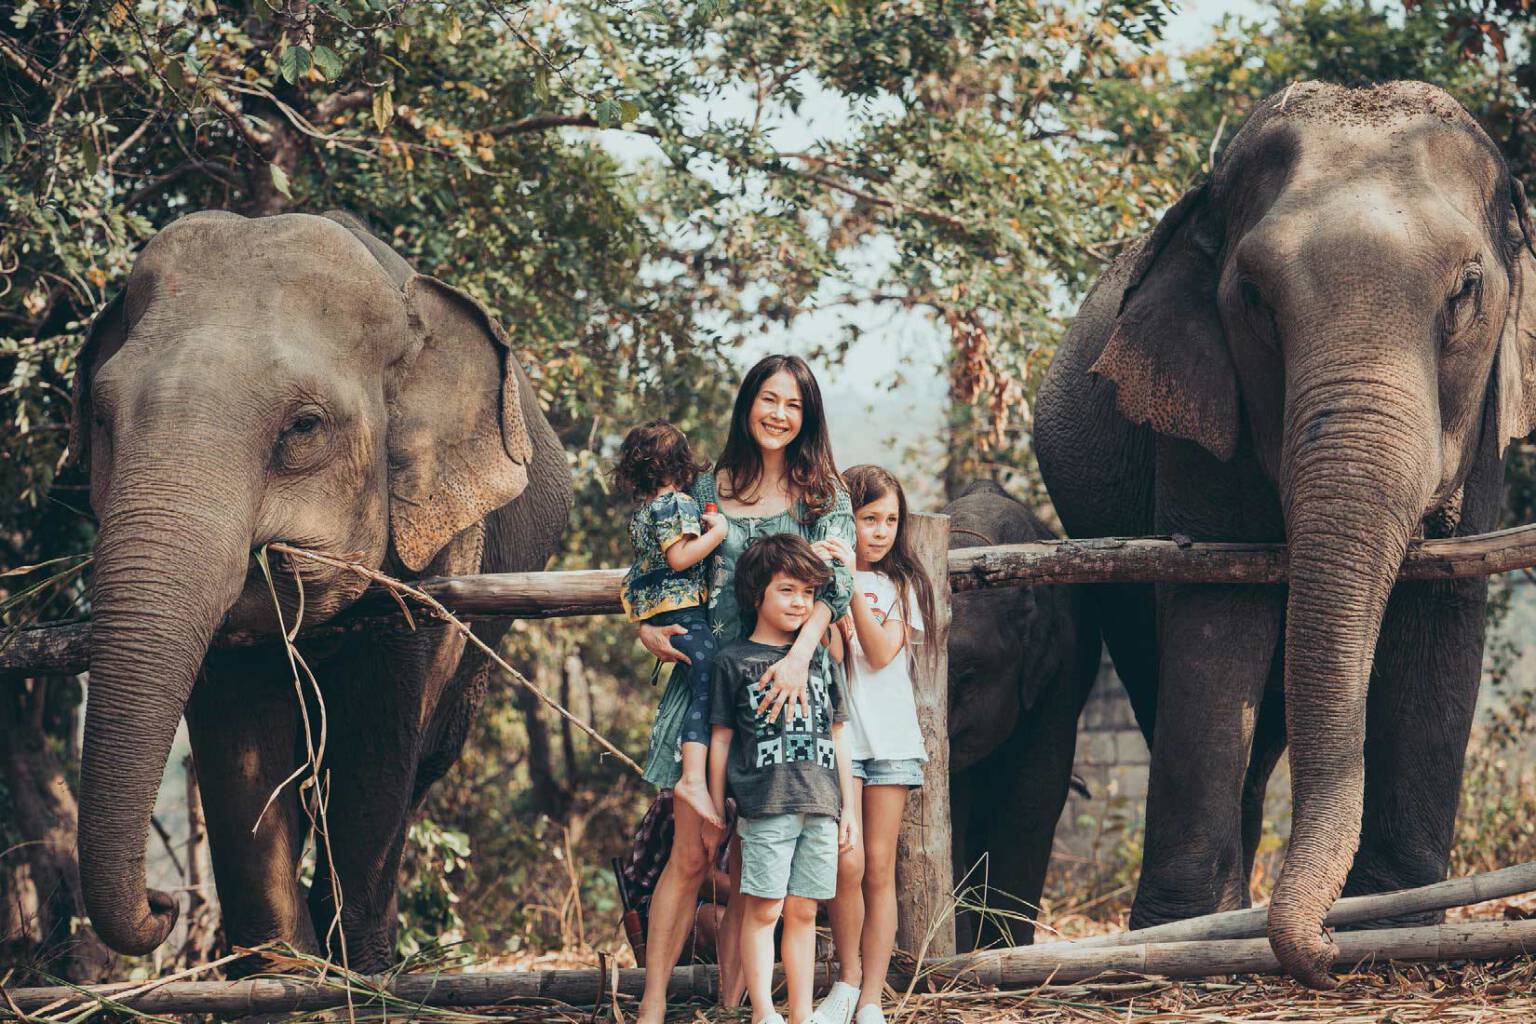 A DAY IN THE LIFE OF ELEPHANTS - Full dfay Chiang Mai photo tour